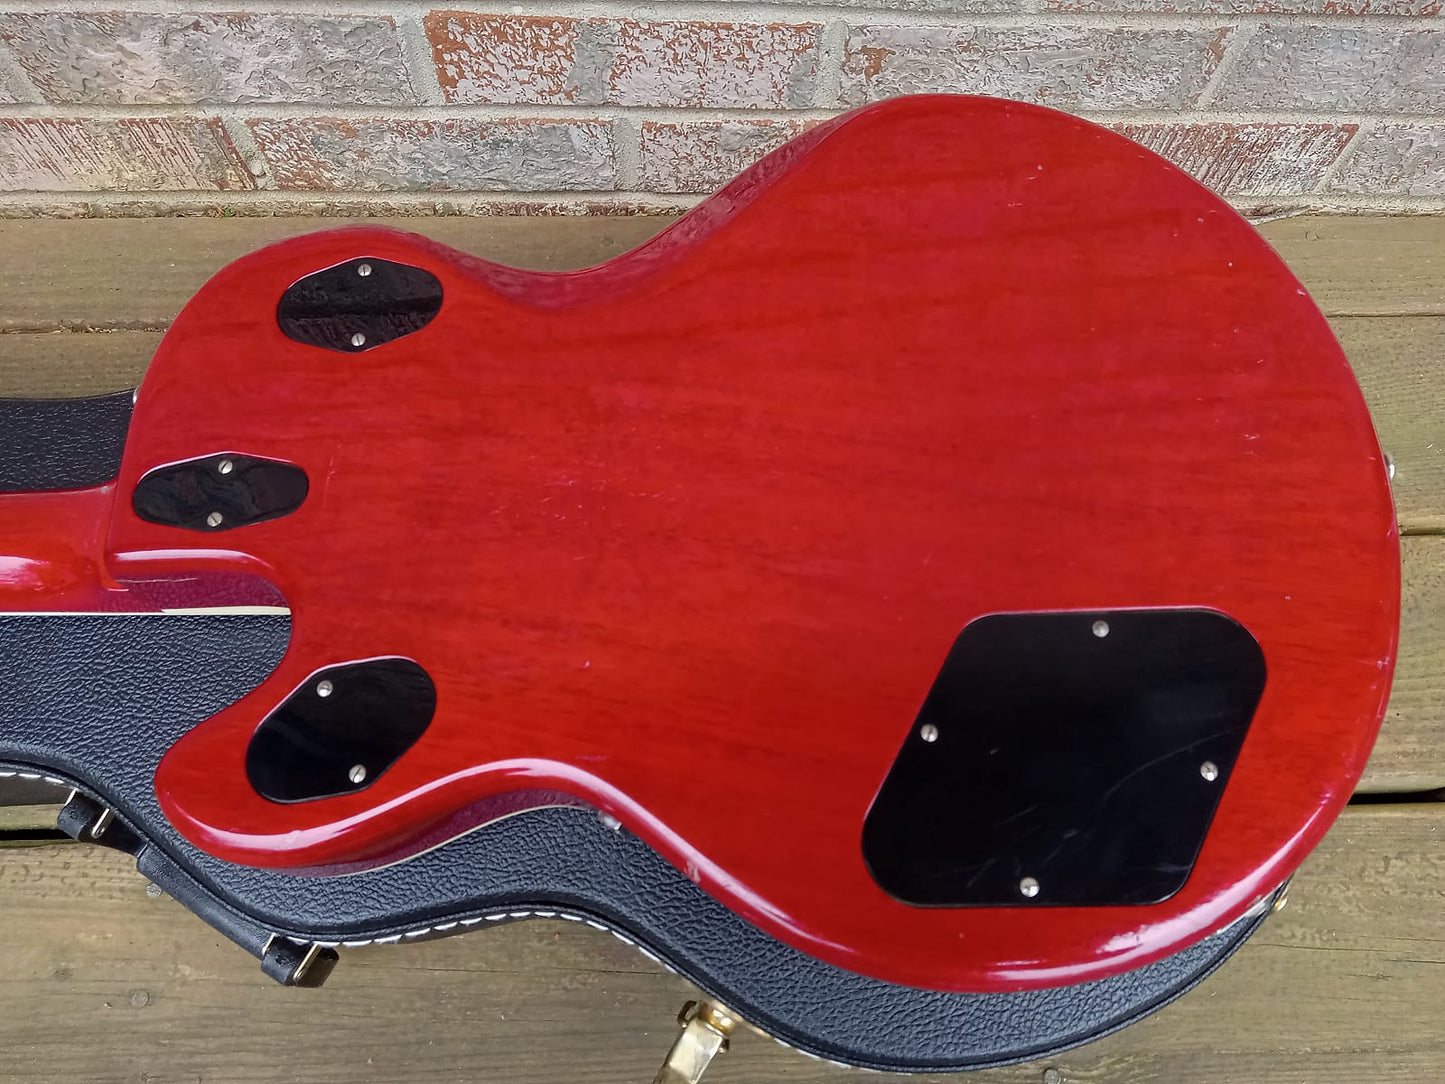 Hagstrom Swede 1974 - Red - Good Condition